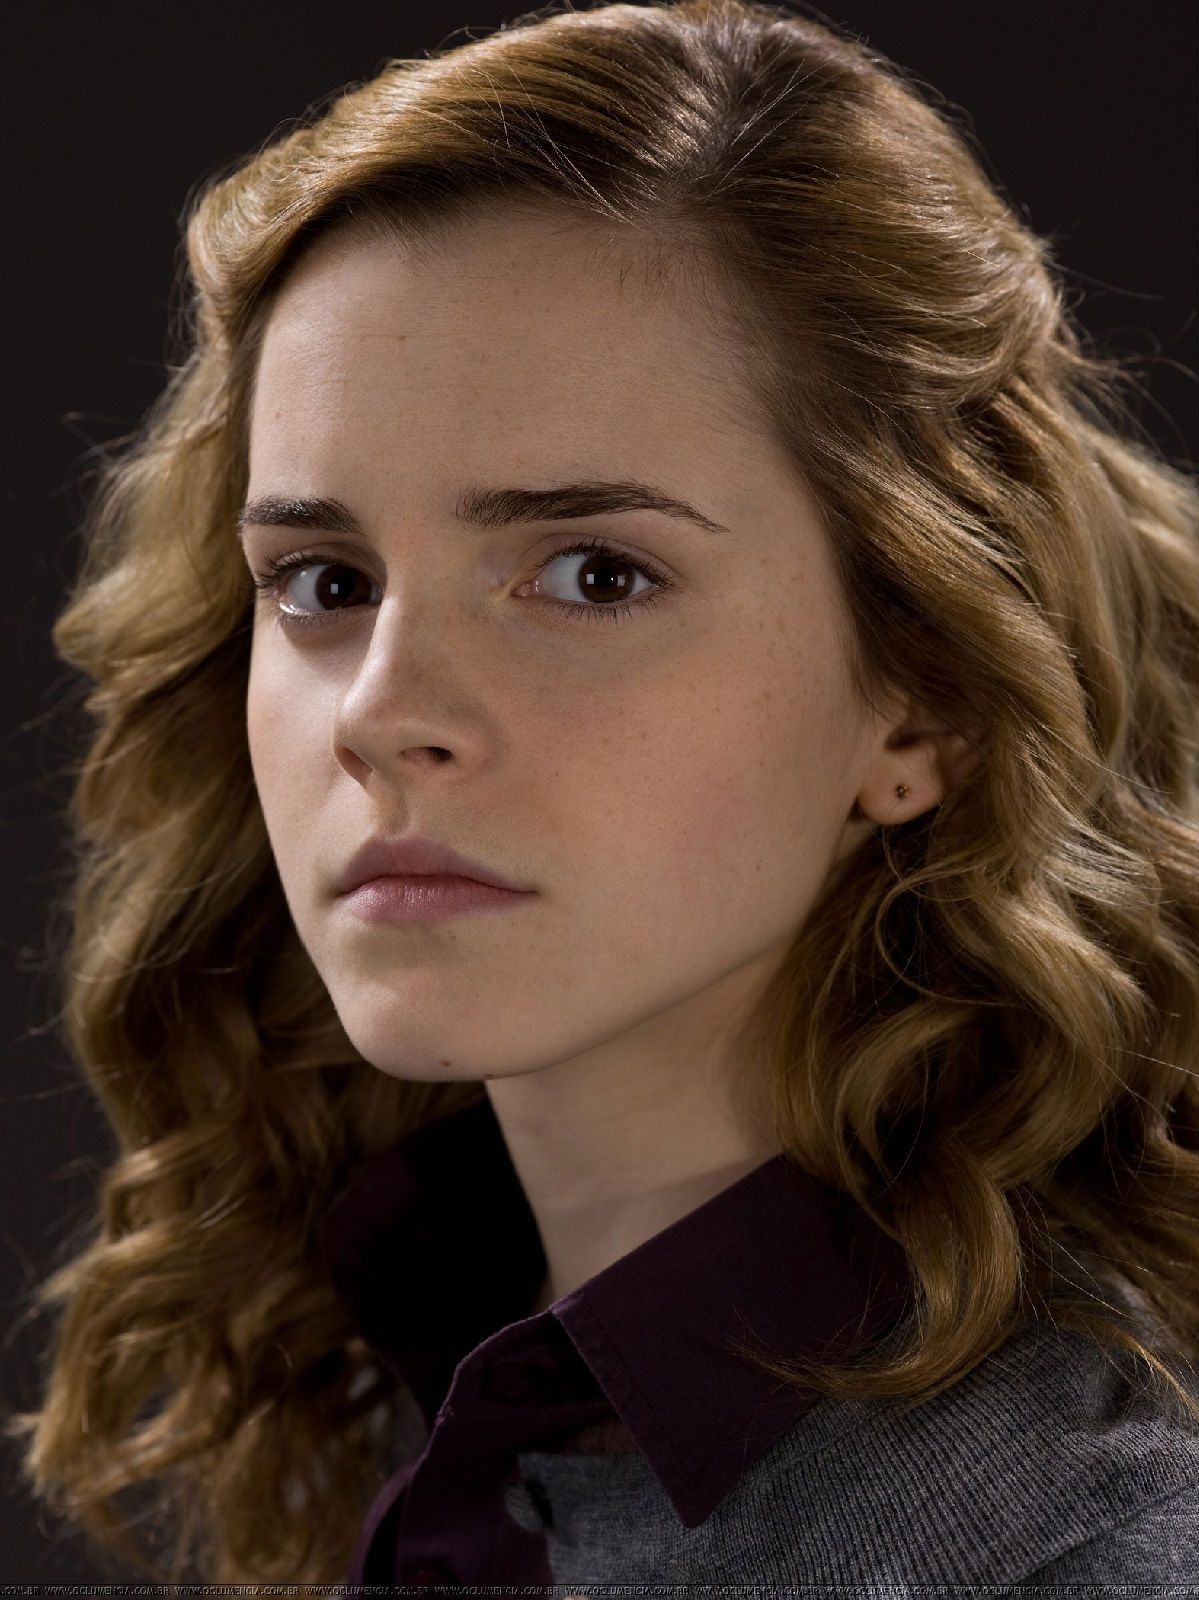 adrian lika recommends Images Of Hermione In Harry Potter